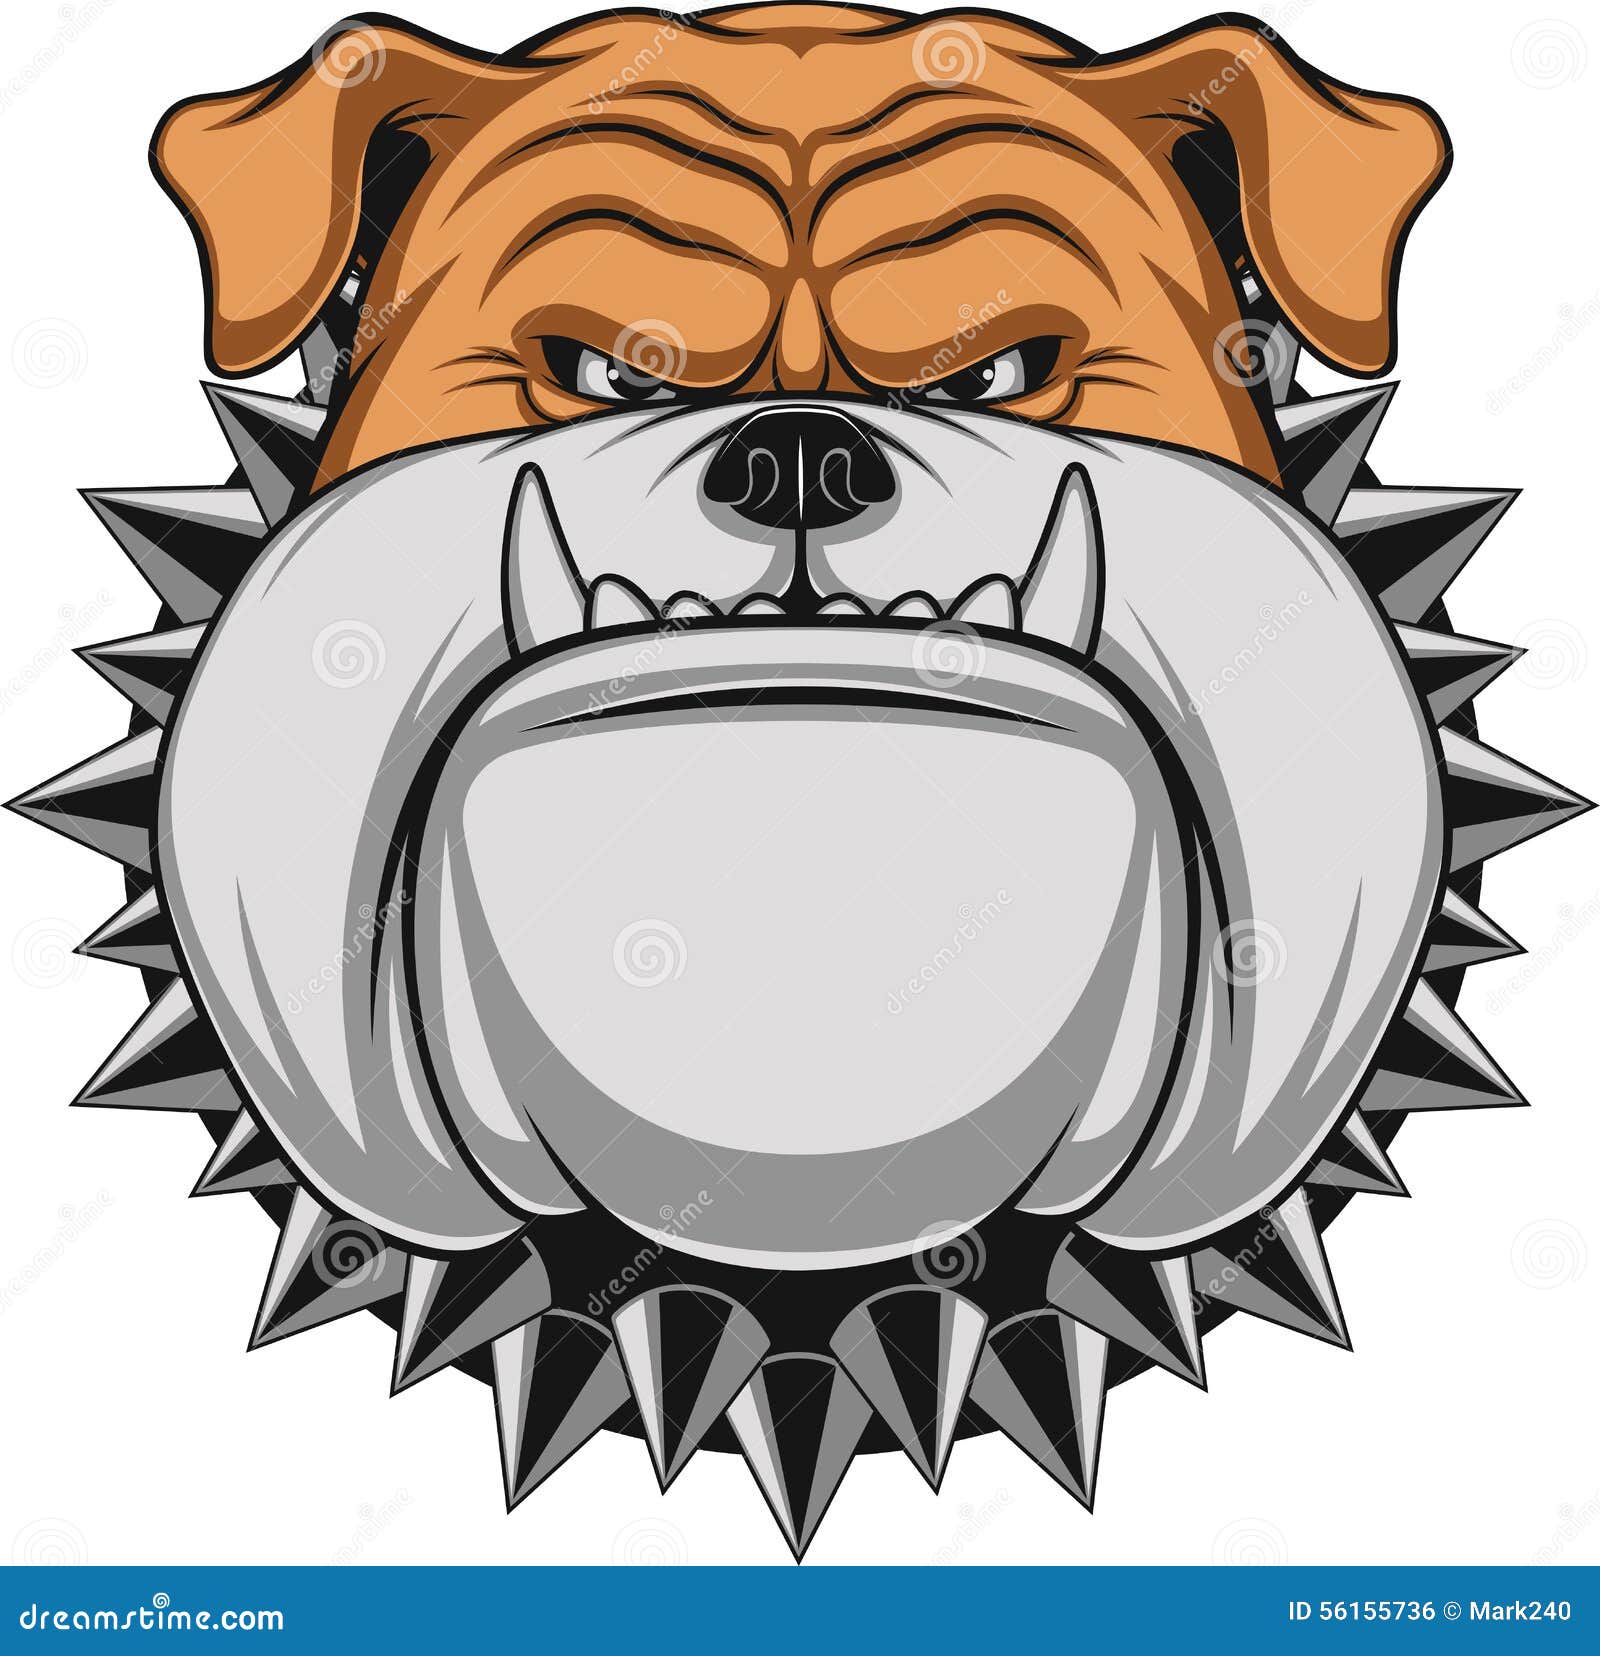 clipart angry dog - photo #45